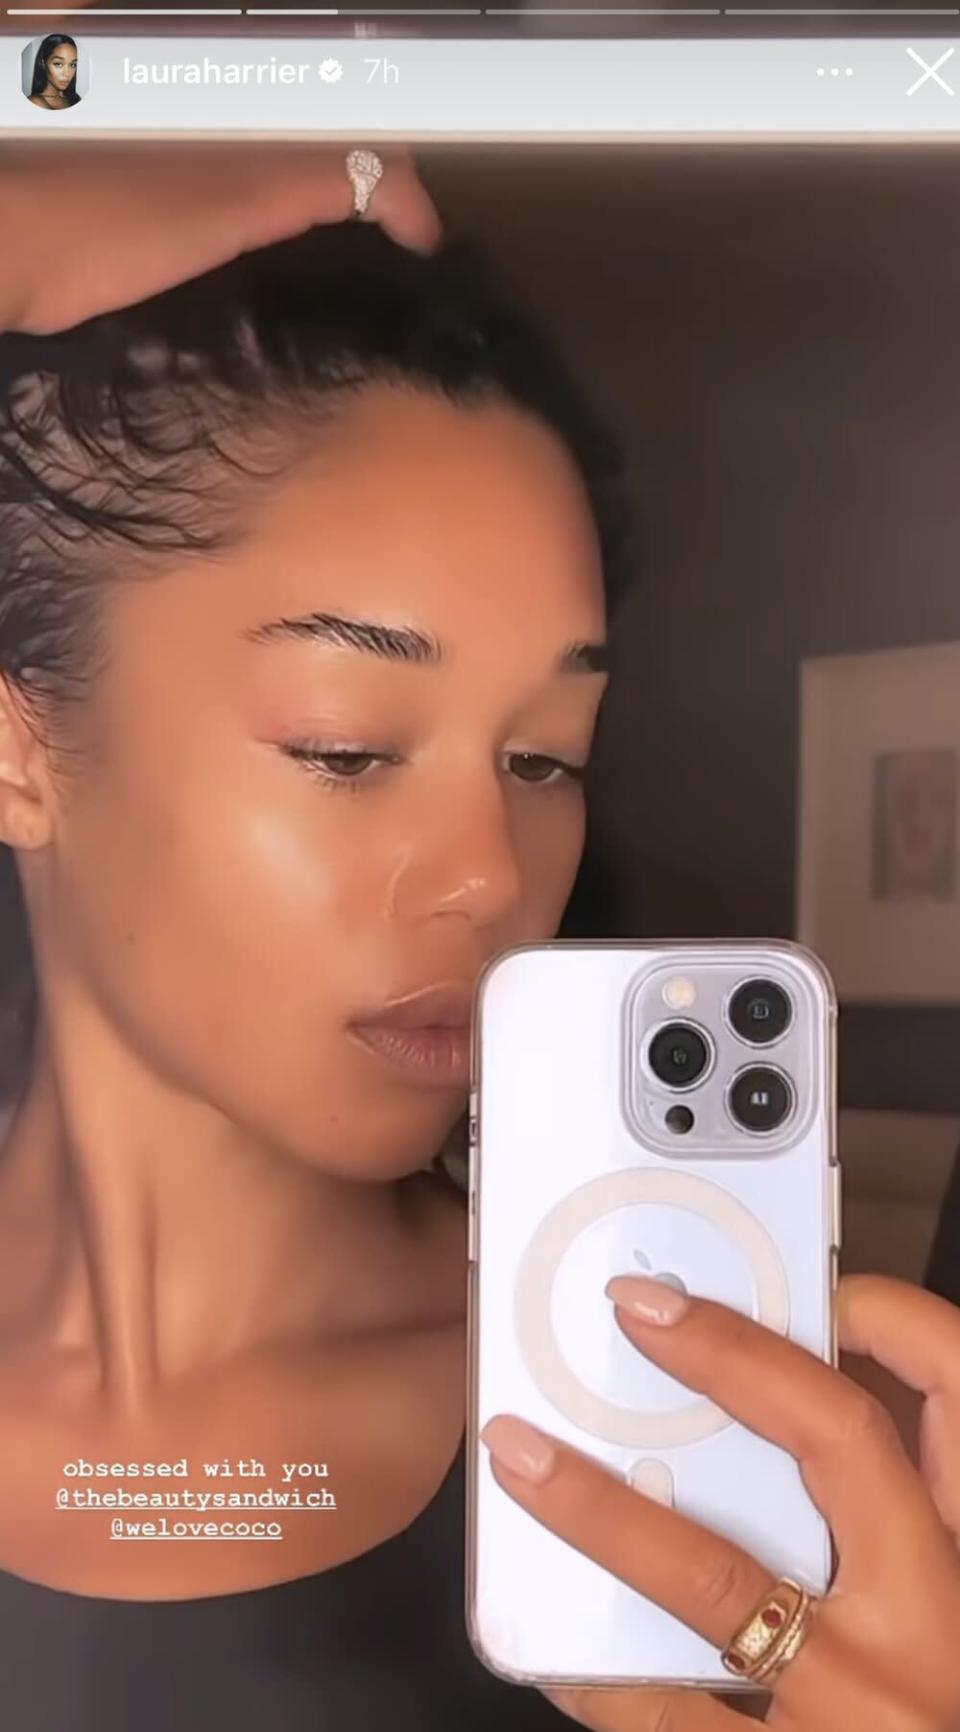 Laura Harrier shows off her pre Met Gala facial through the beauty sandwich on instagram stories